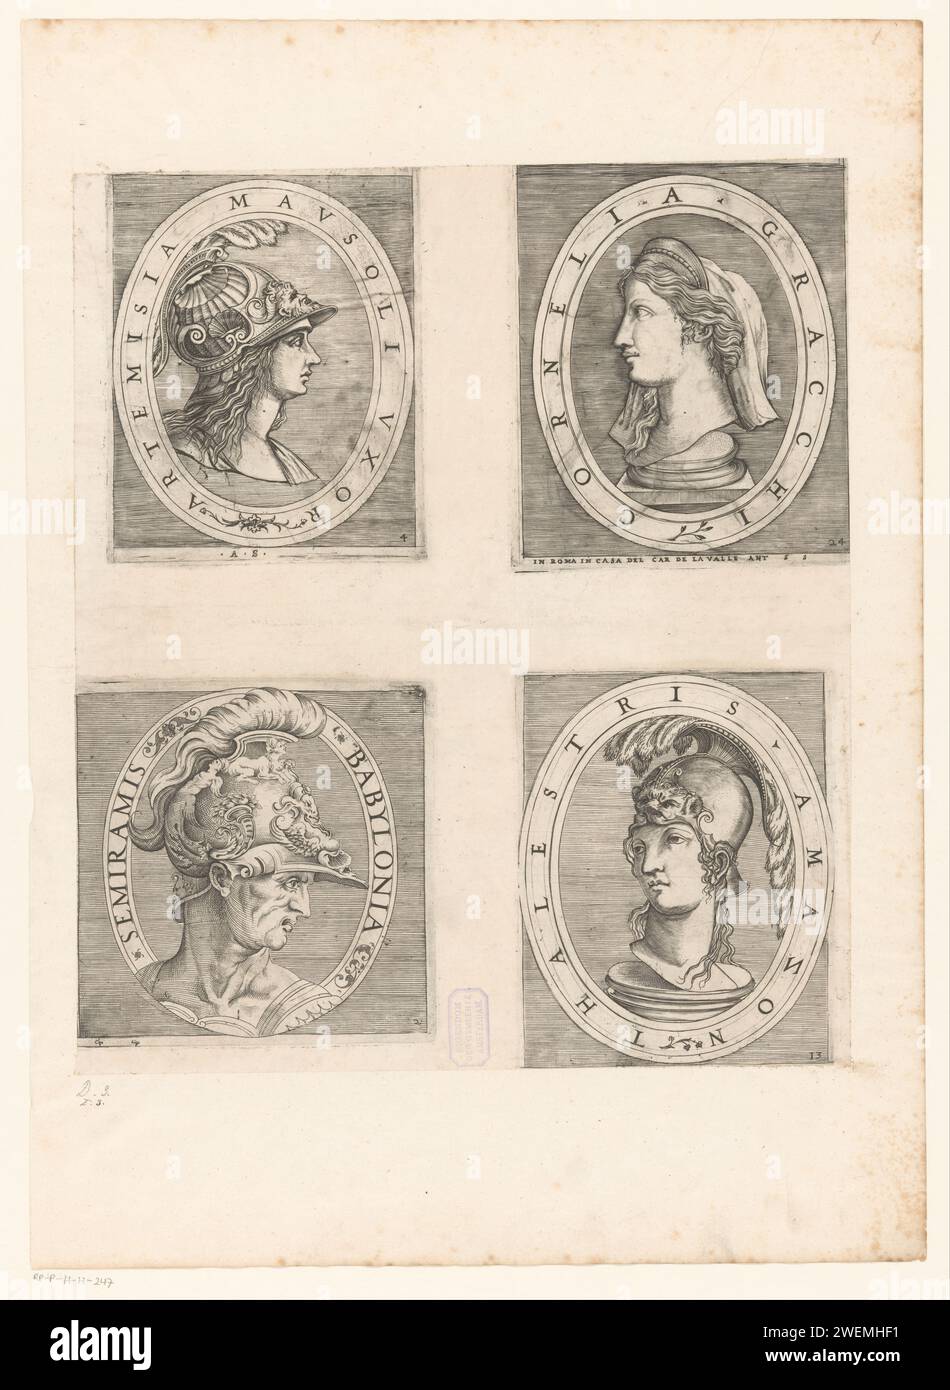 Vier PortetBustes, Anonymous, Antonio Salamanca, 1510 - 1562 print Leaf with four performances of medallions with busts. At the top left: portrait bust of Artemisia Mausoli Uxor. Numbered below: 4. At the top right: Portrait bust of Cornelia Gracchi. Numbered below: 24. Bottom left: Semiramis Babylonia. Numbered bottom right: 2. bottom right: Portrait bust of Thalestris Amazon. Numbered below: 13.  paper engraving historical persons. historical persons - BB - woman. helmet. piece of sculpture, reproduction of a piece of sculpture Stock Photo